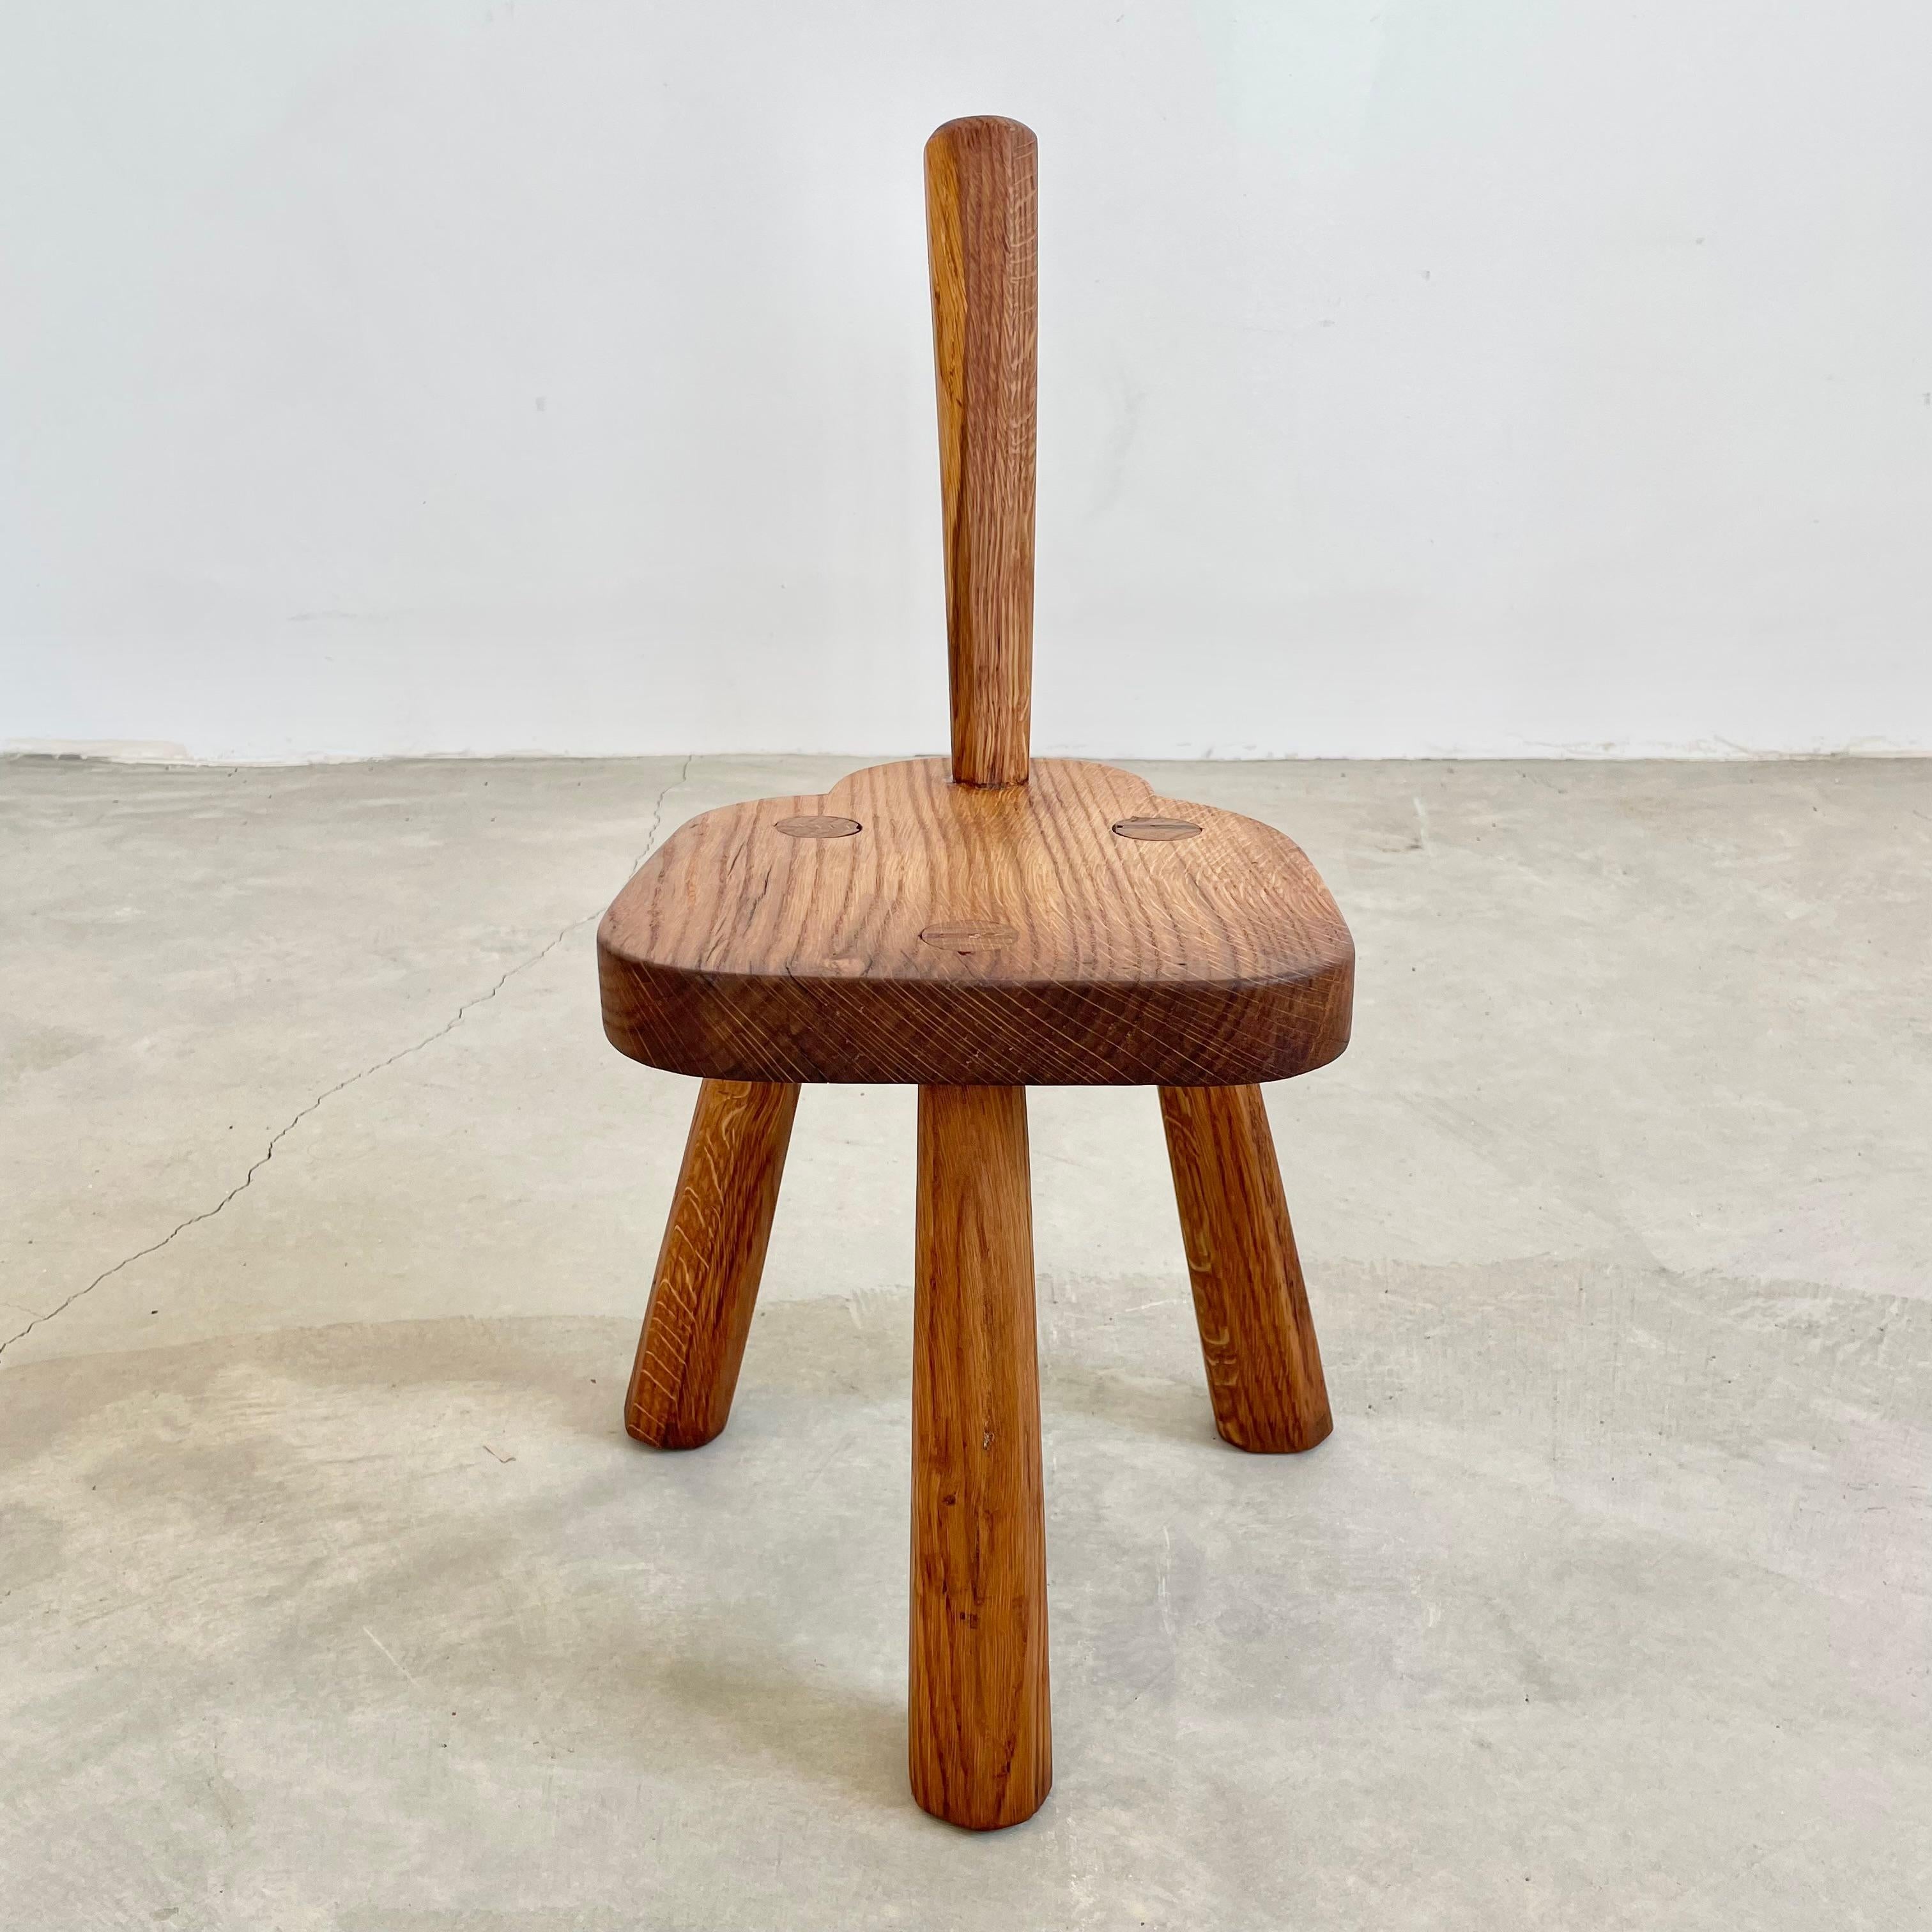 Wood Tripod Stool with Backrest, 1960s France For Sale 6